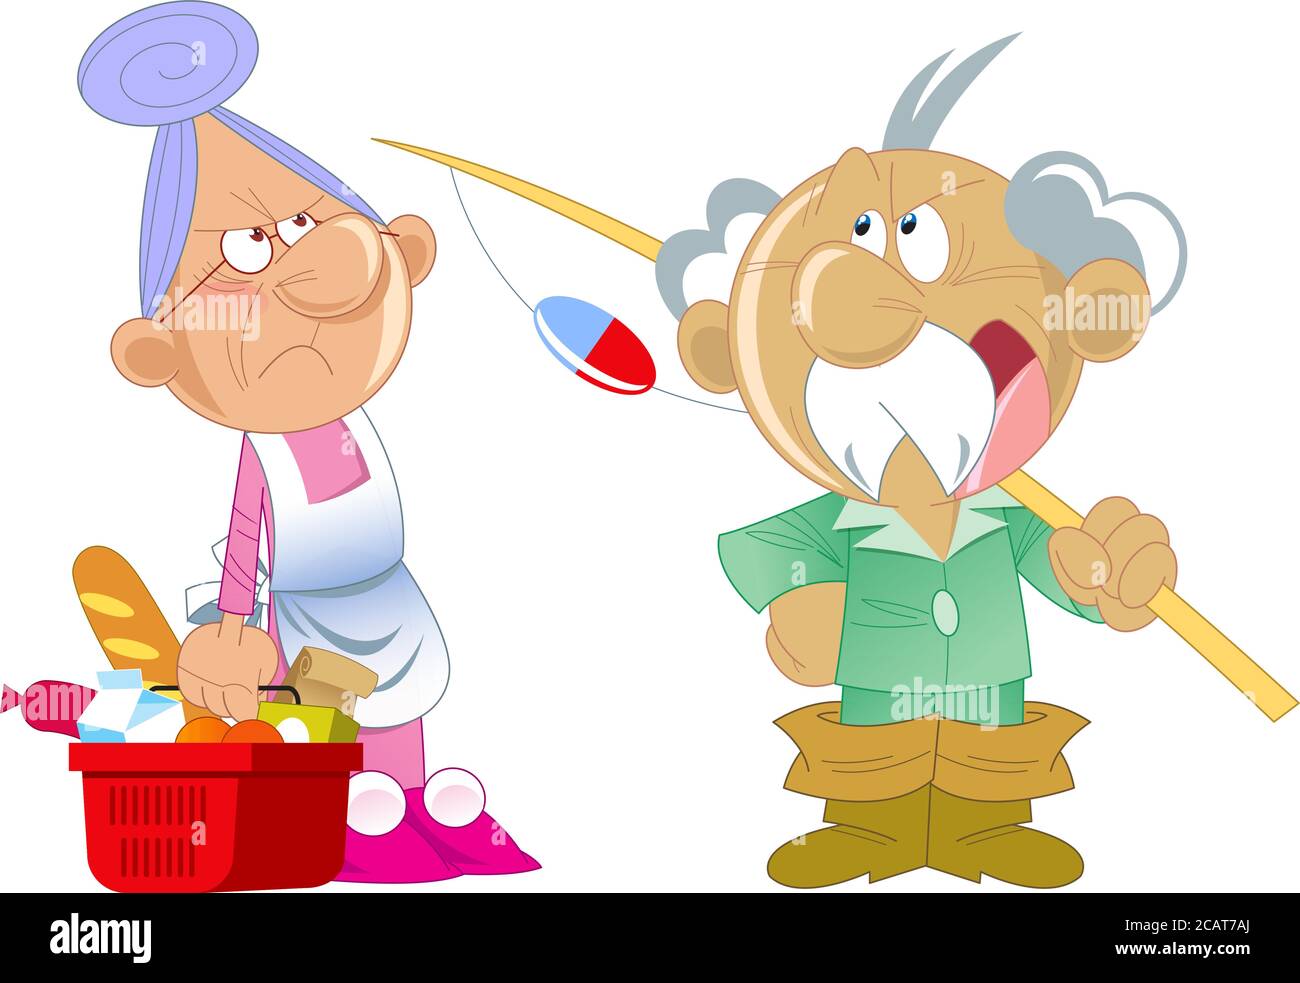 The vector illustration depicts an elderly active couple in a cartoon style. Grandma was shopping at the store, and grandfather goes fishing. Stock Vector